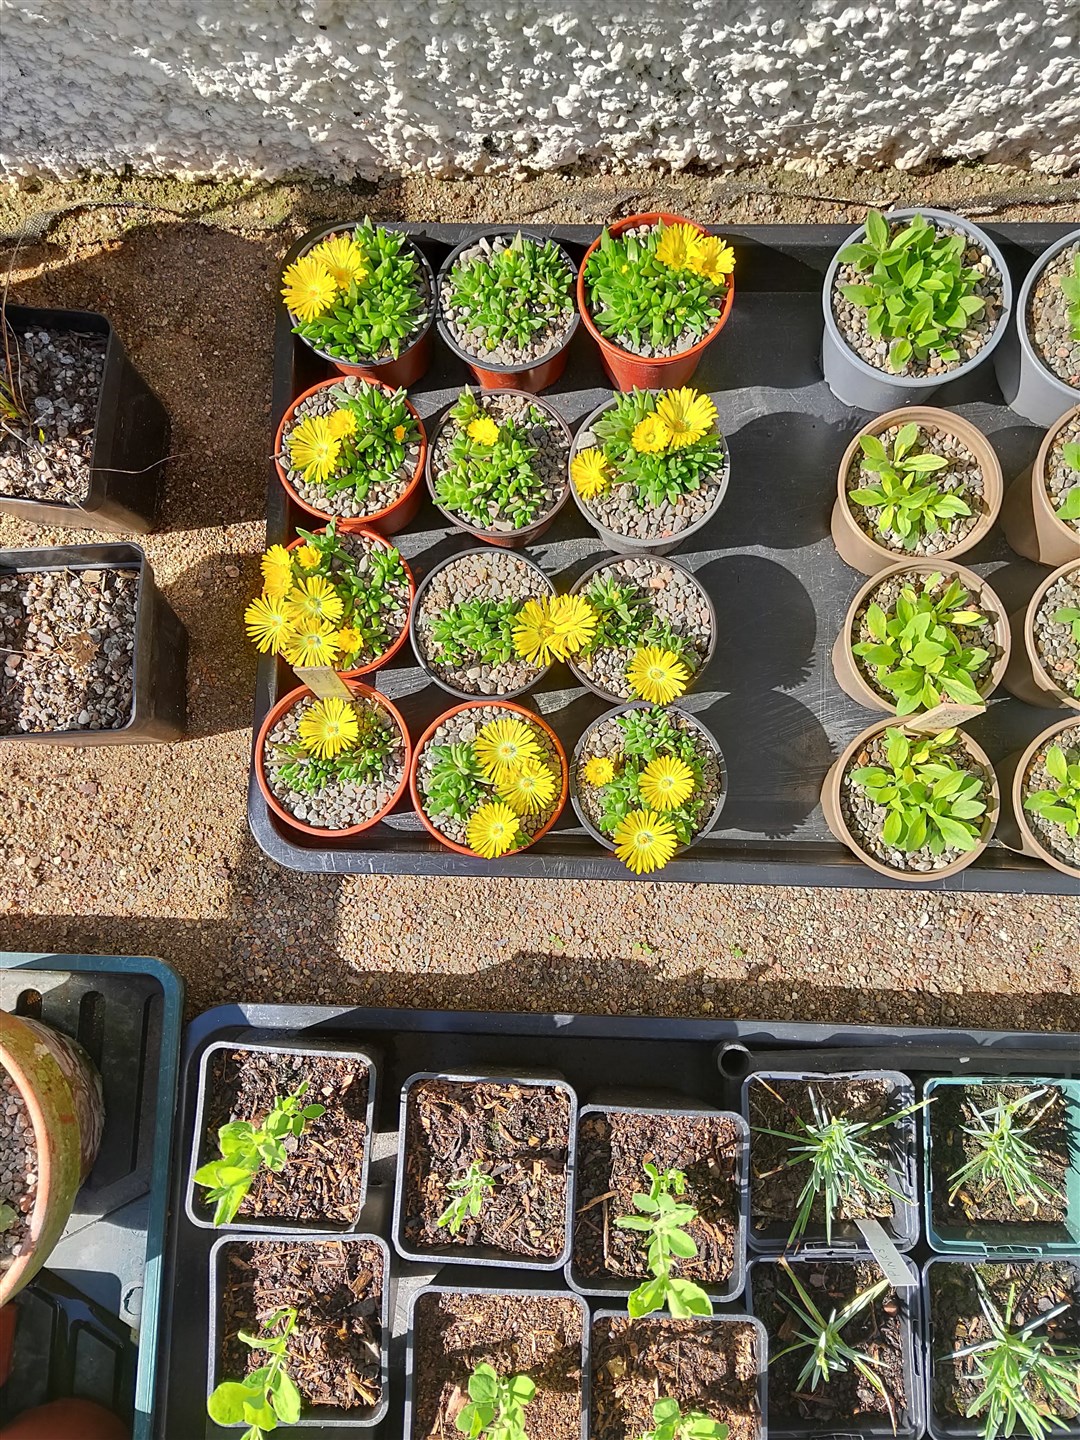 Some of the plants available at the Black Isle Horticultural Society's plant sale planned for Rosemarkie on Saturday.